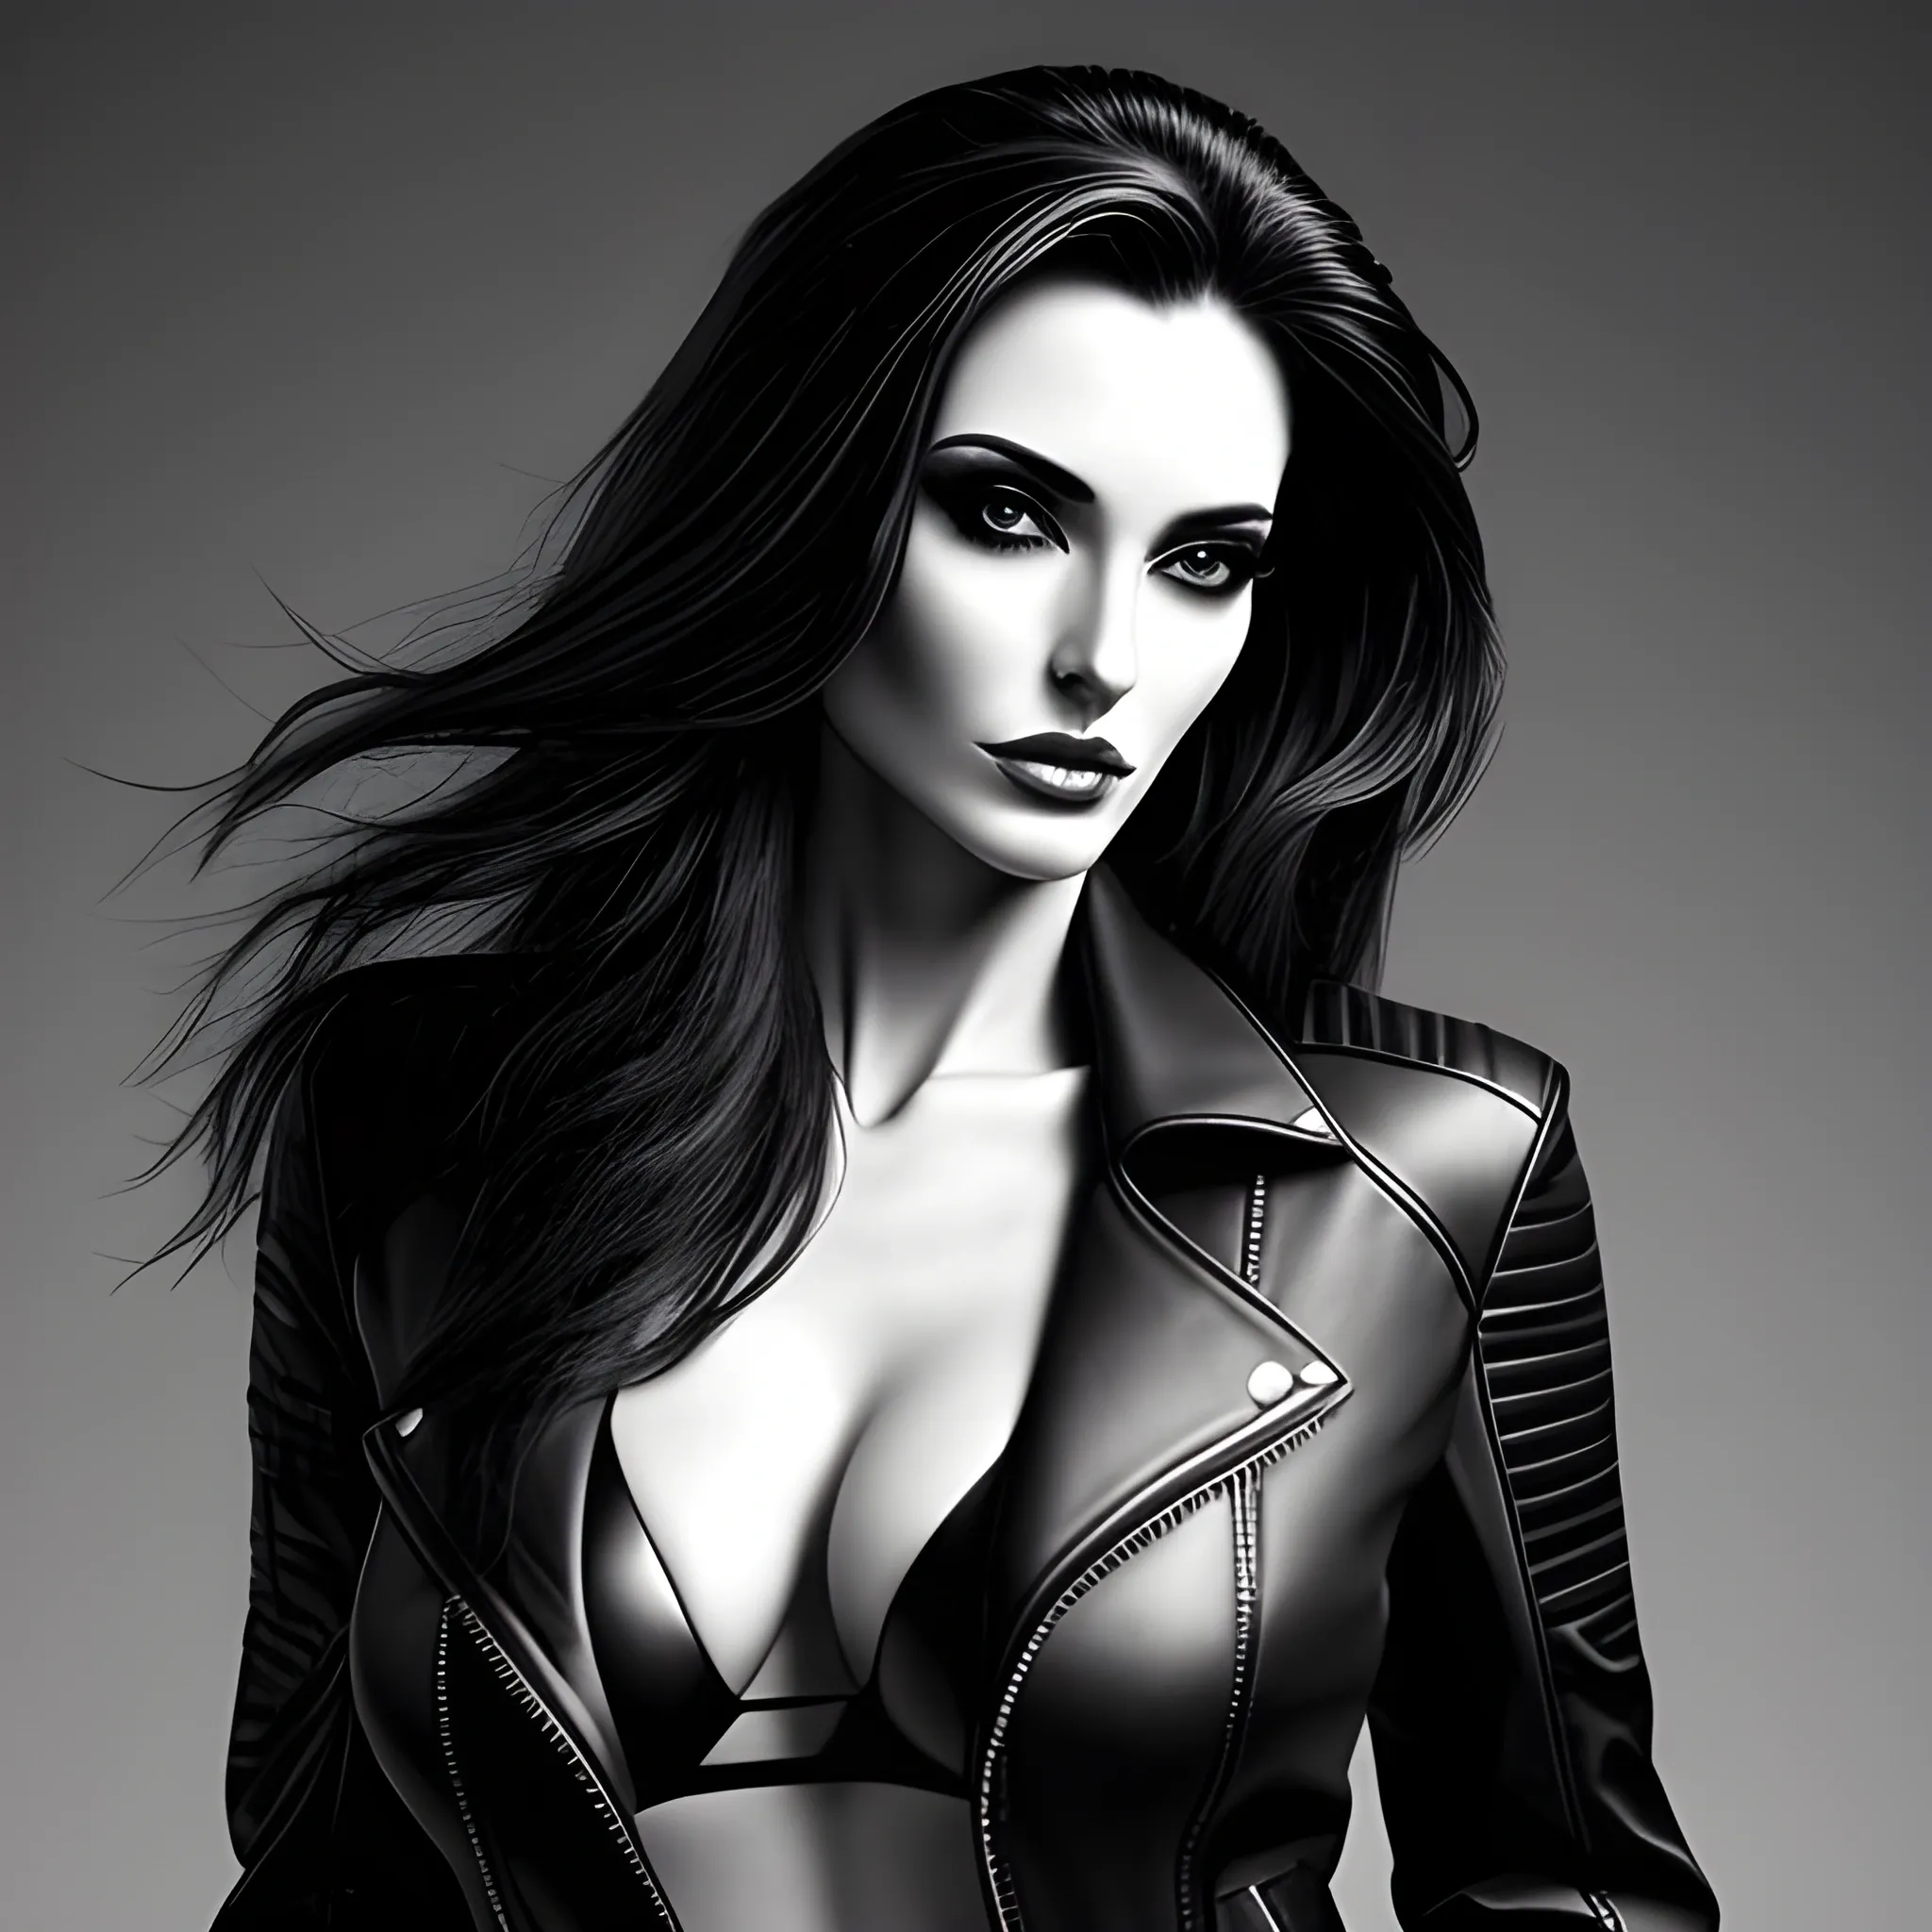 Black and white portrait of beautiful girl with long messy hair and stunning open black leather jacket, stunning, erotic, no background, highest quality
